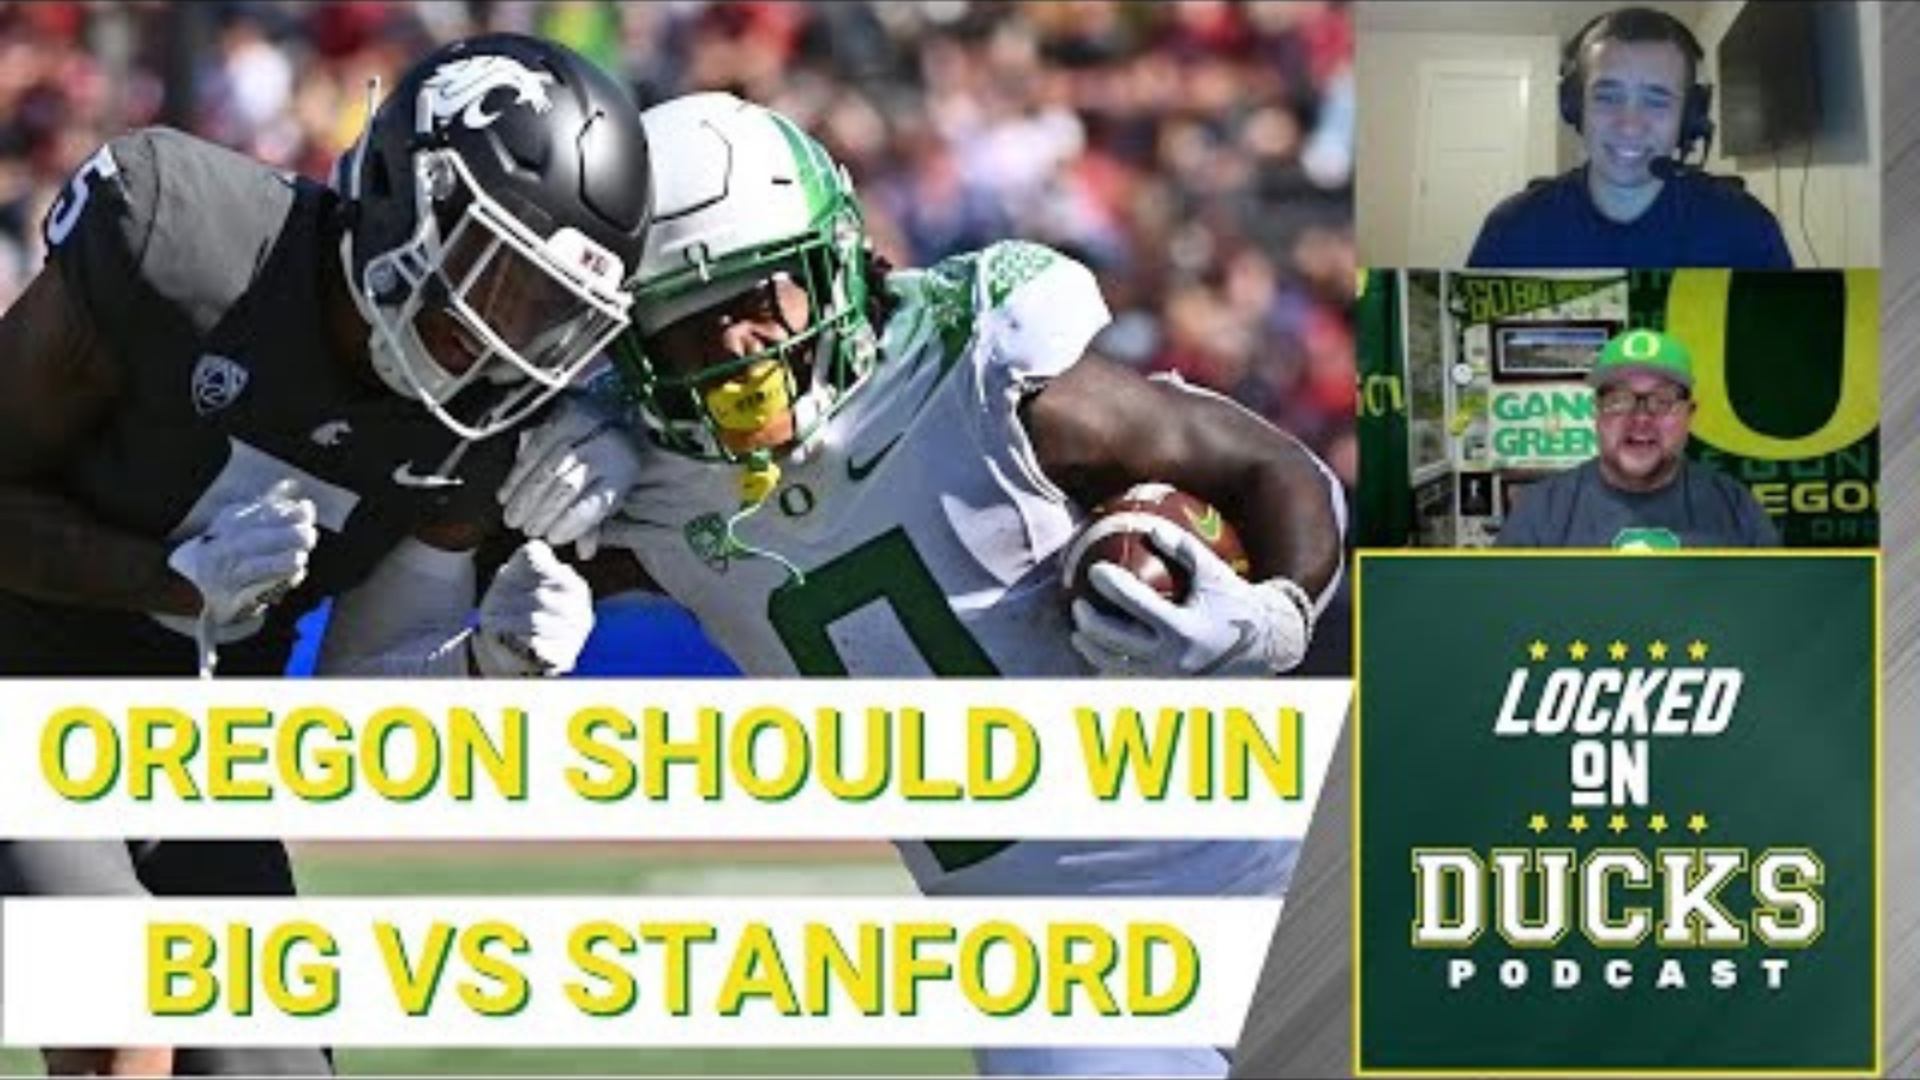 We talk about the reasons why Oregon can and should win big on Saturday, playing host to Stanford.